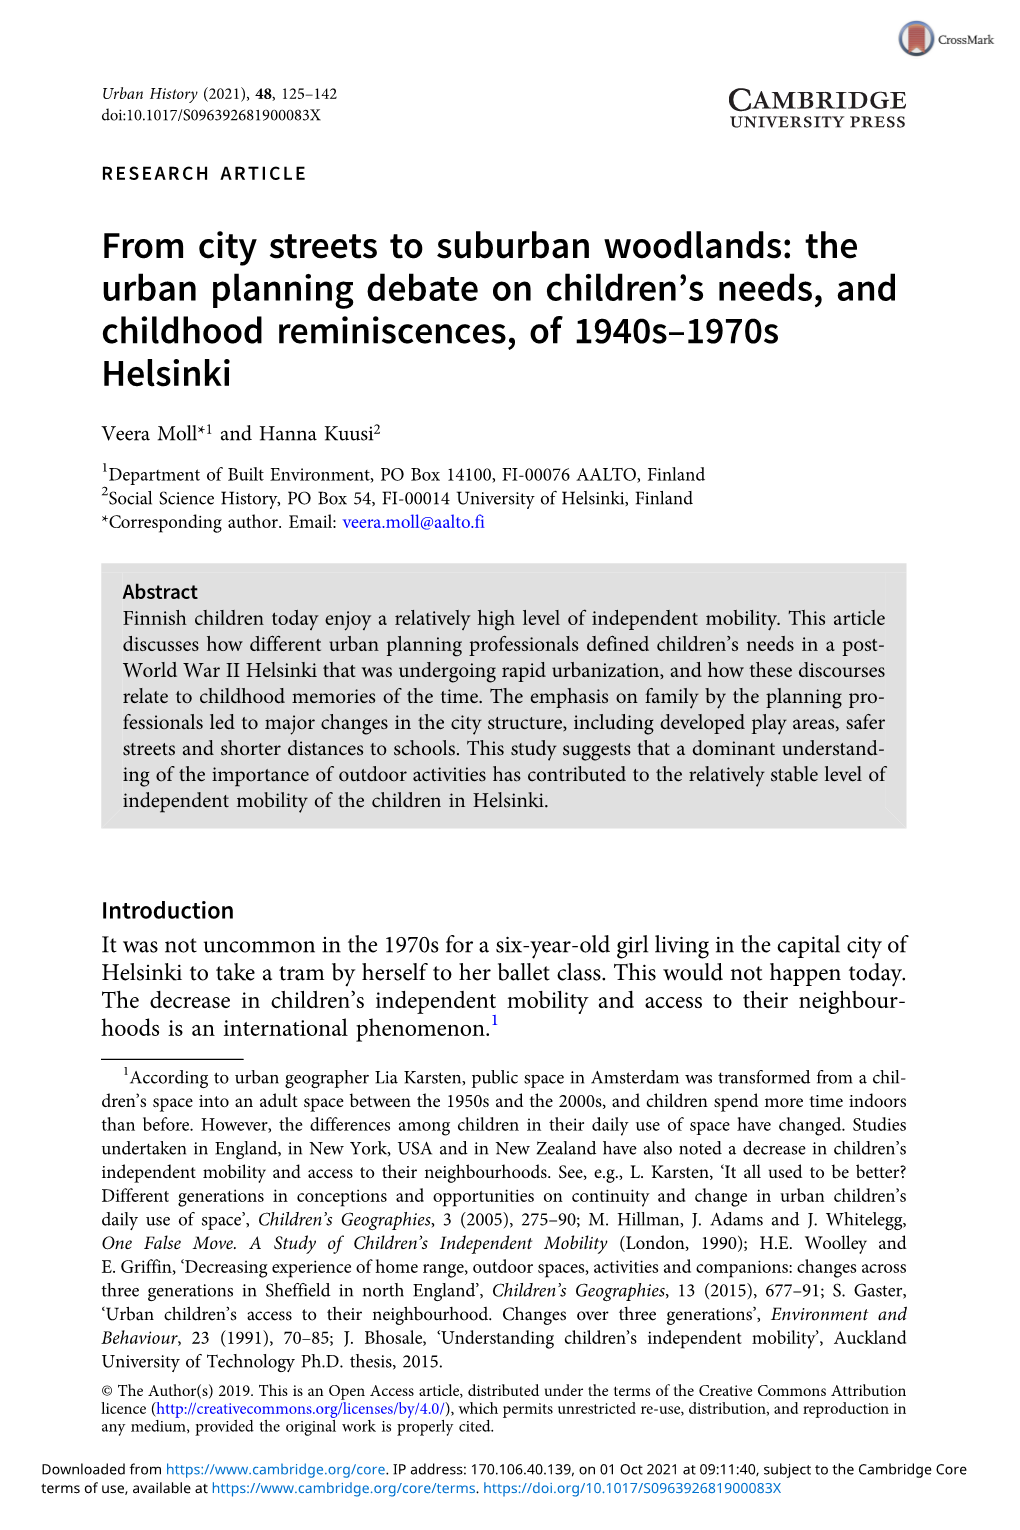 From City Streets to Suburban Woodlands: the Urban Planning Debate on Children’S Needs, and Childhood Reminiscences, of 1940S–1970S Helsinki